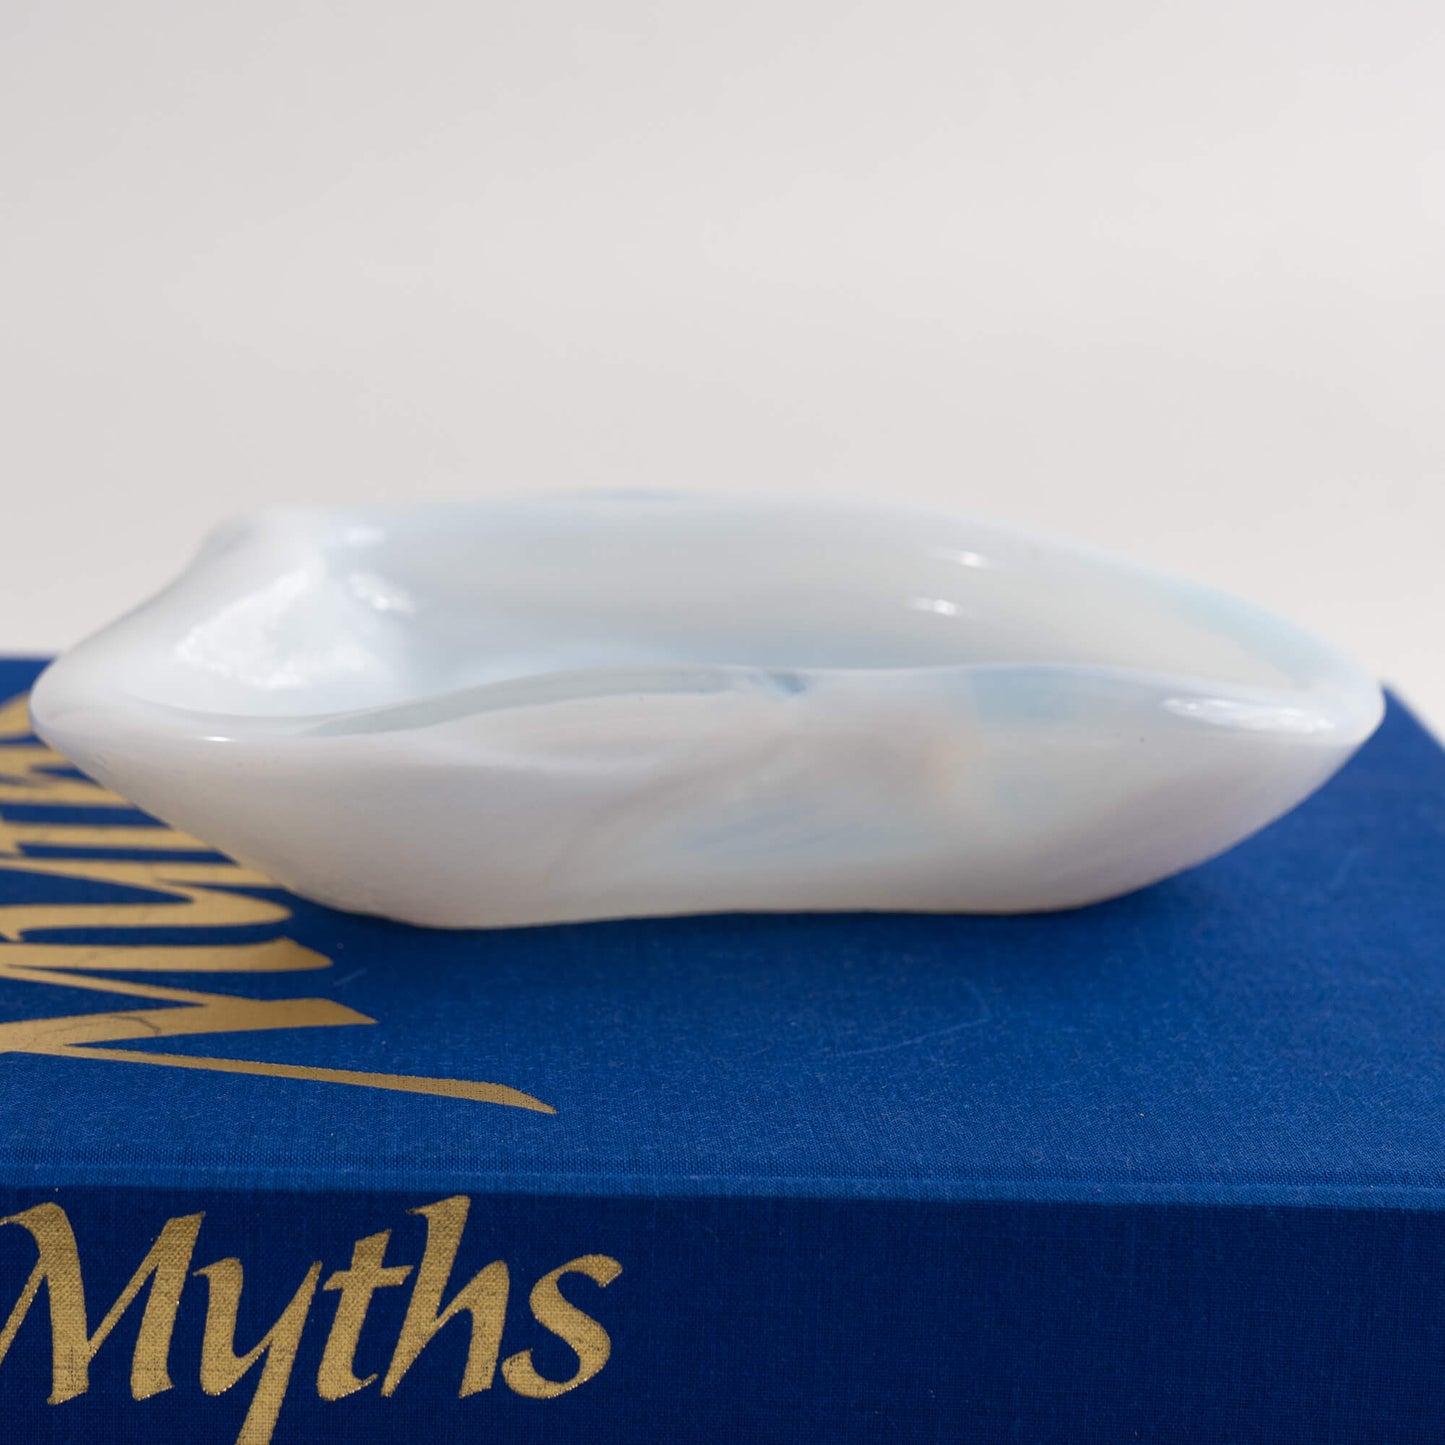 Load image into Gallery viewer, Vintage Blenko White Glass Biomorphic Ashtray
